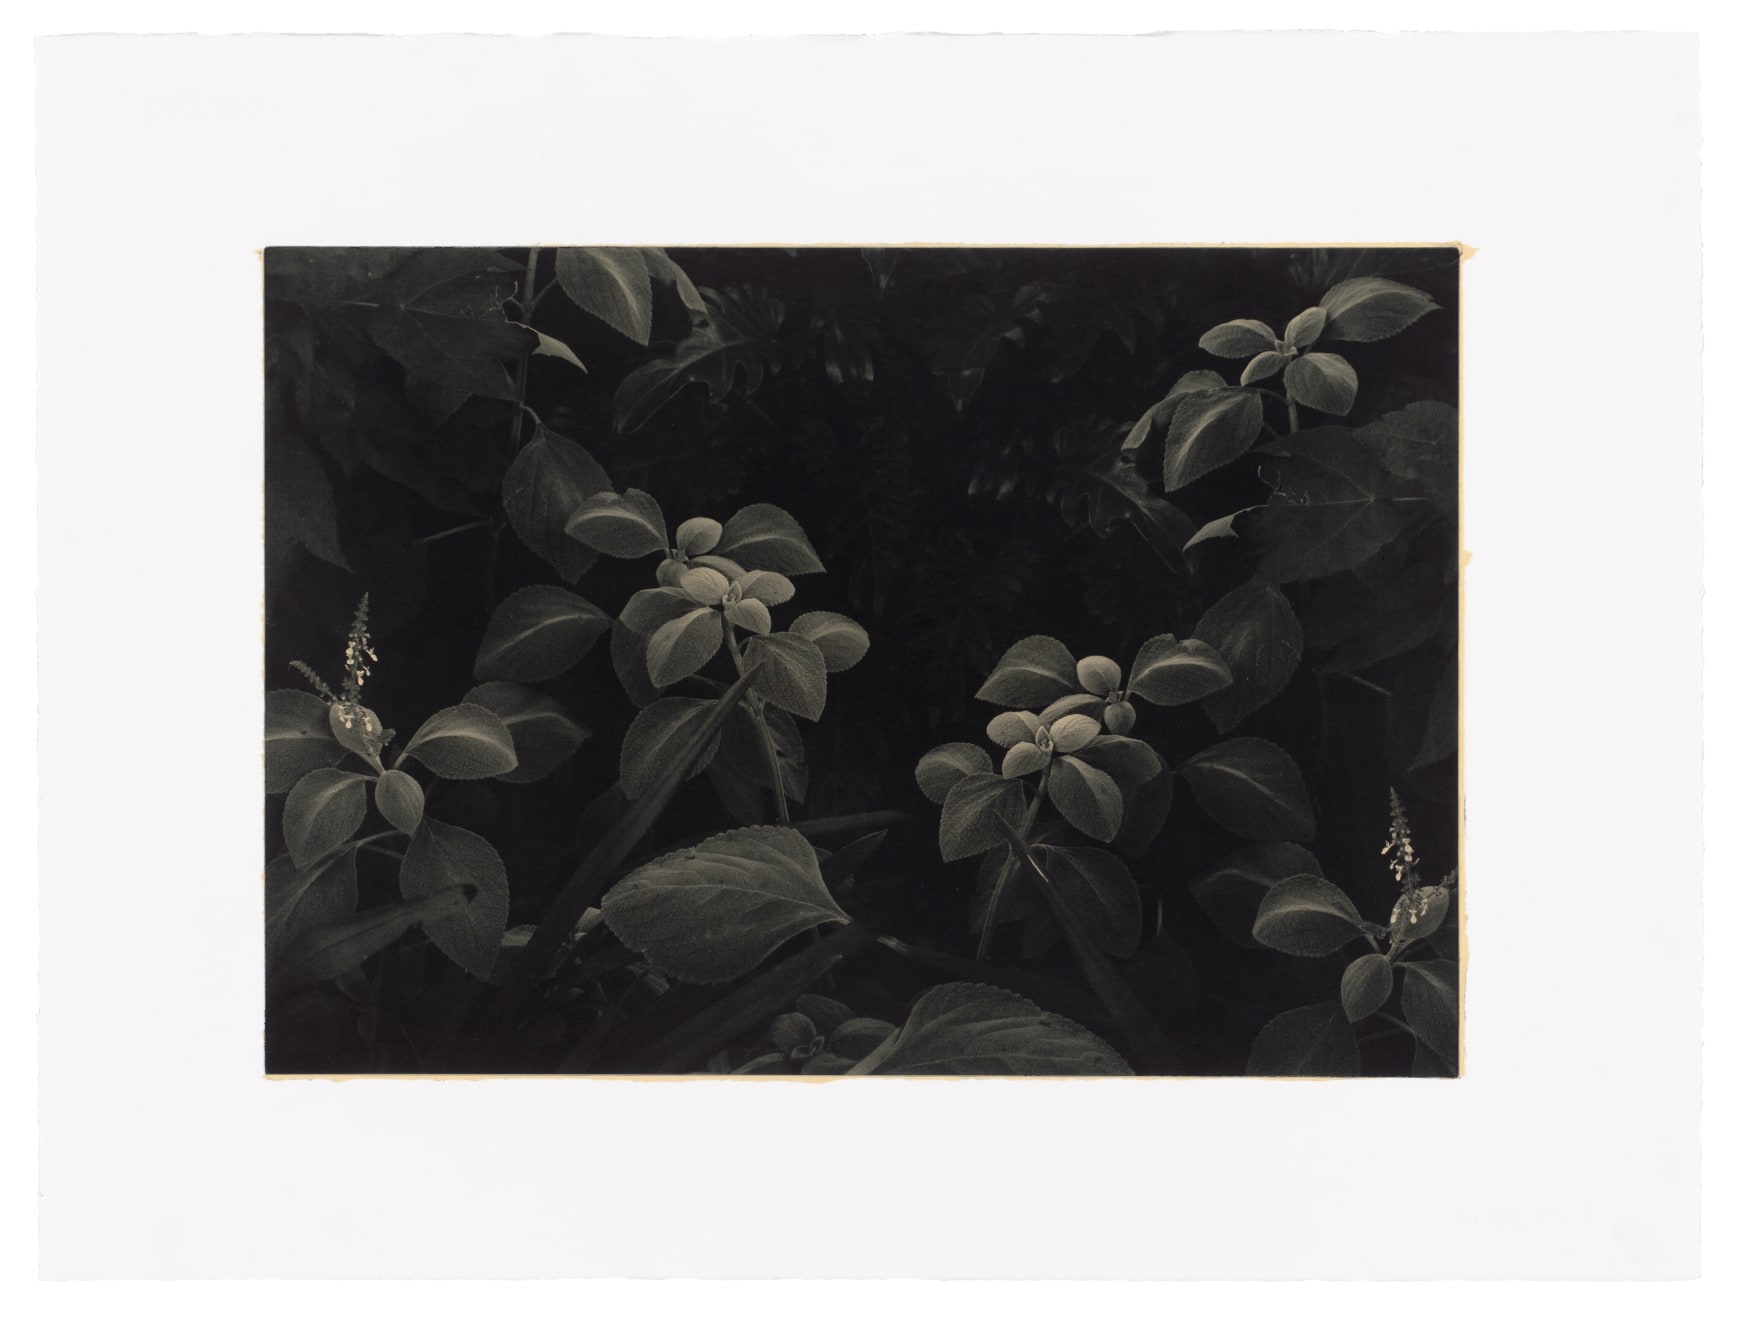 The Forest Photogravure Etching with Chin Collé 76 x 56cm Edition of 3 plus 1 artist's proof $ 990.00